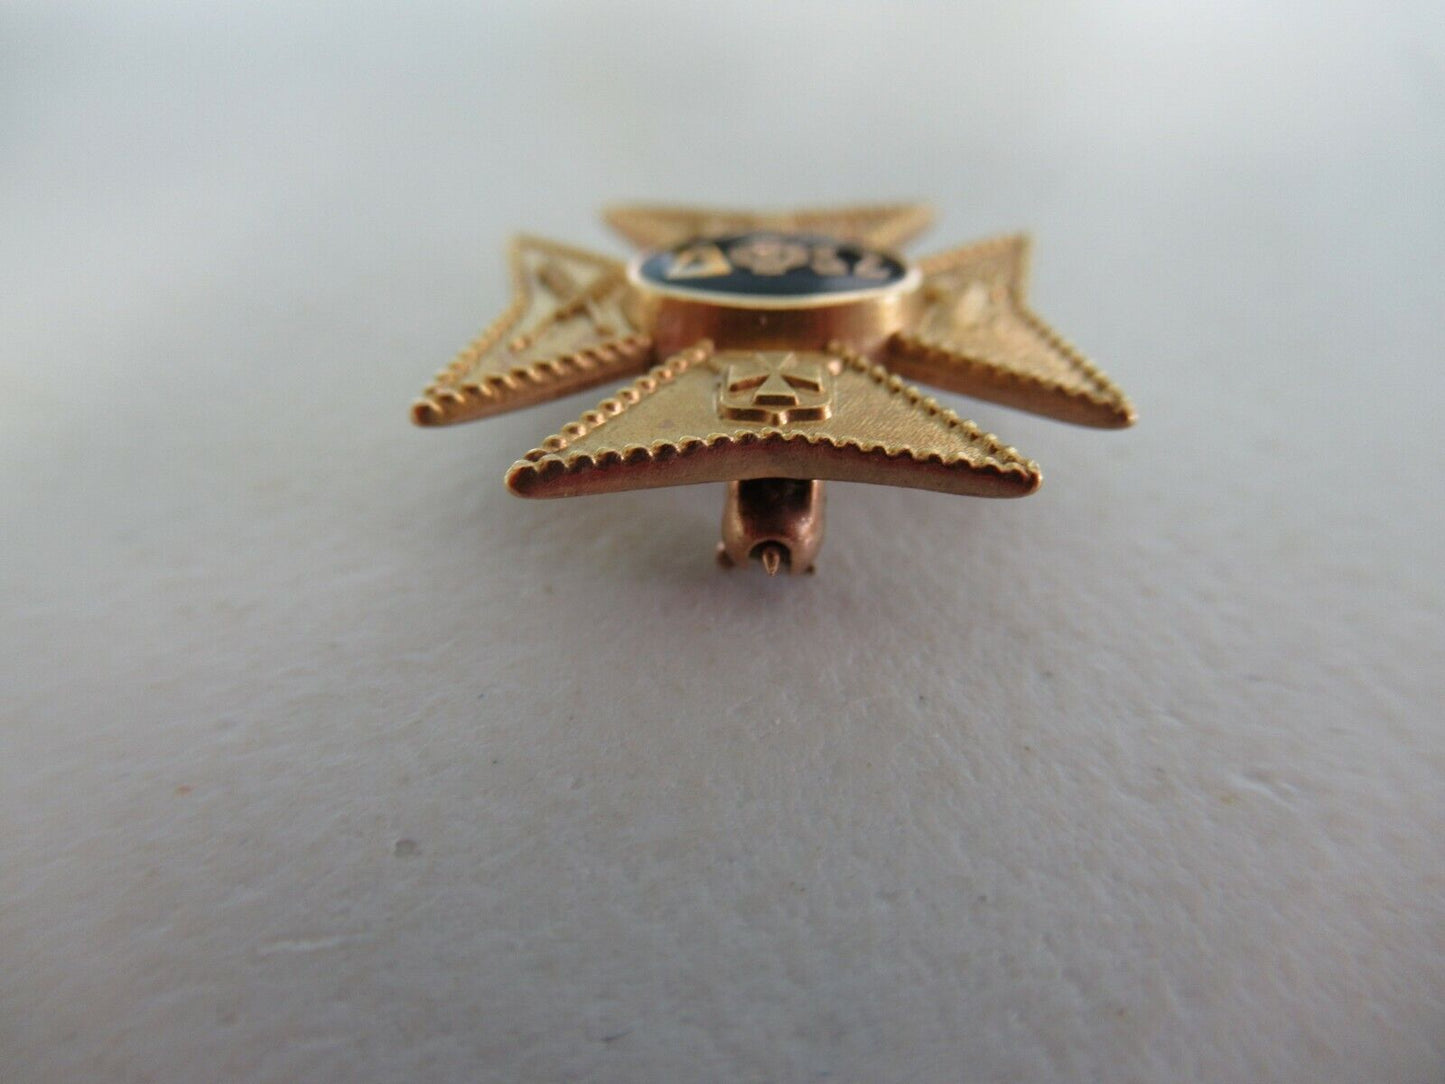 USA FRATERNITY PIN DELTA PHI OMEGA. MADE IN GOLD 10K. NAMED. MARKED. B